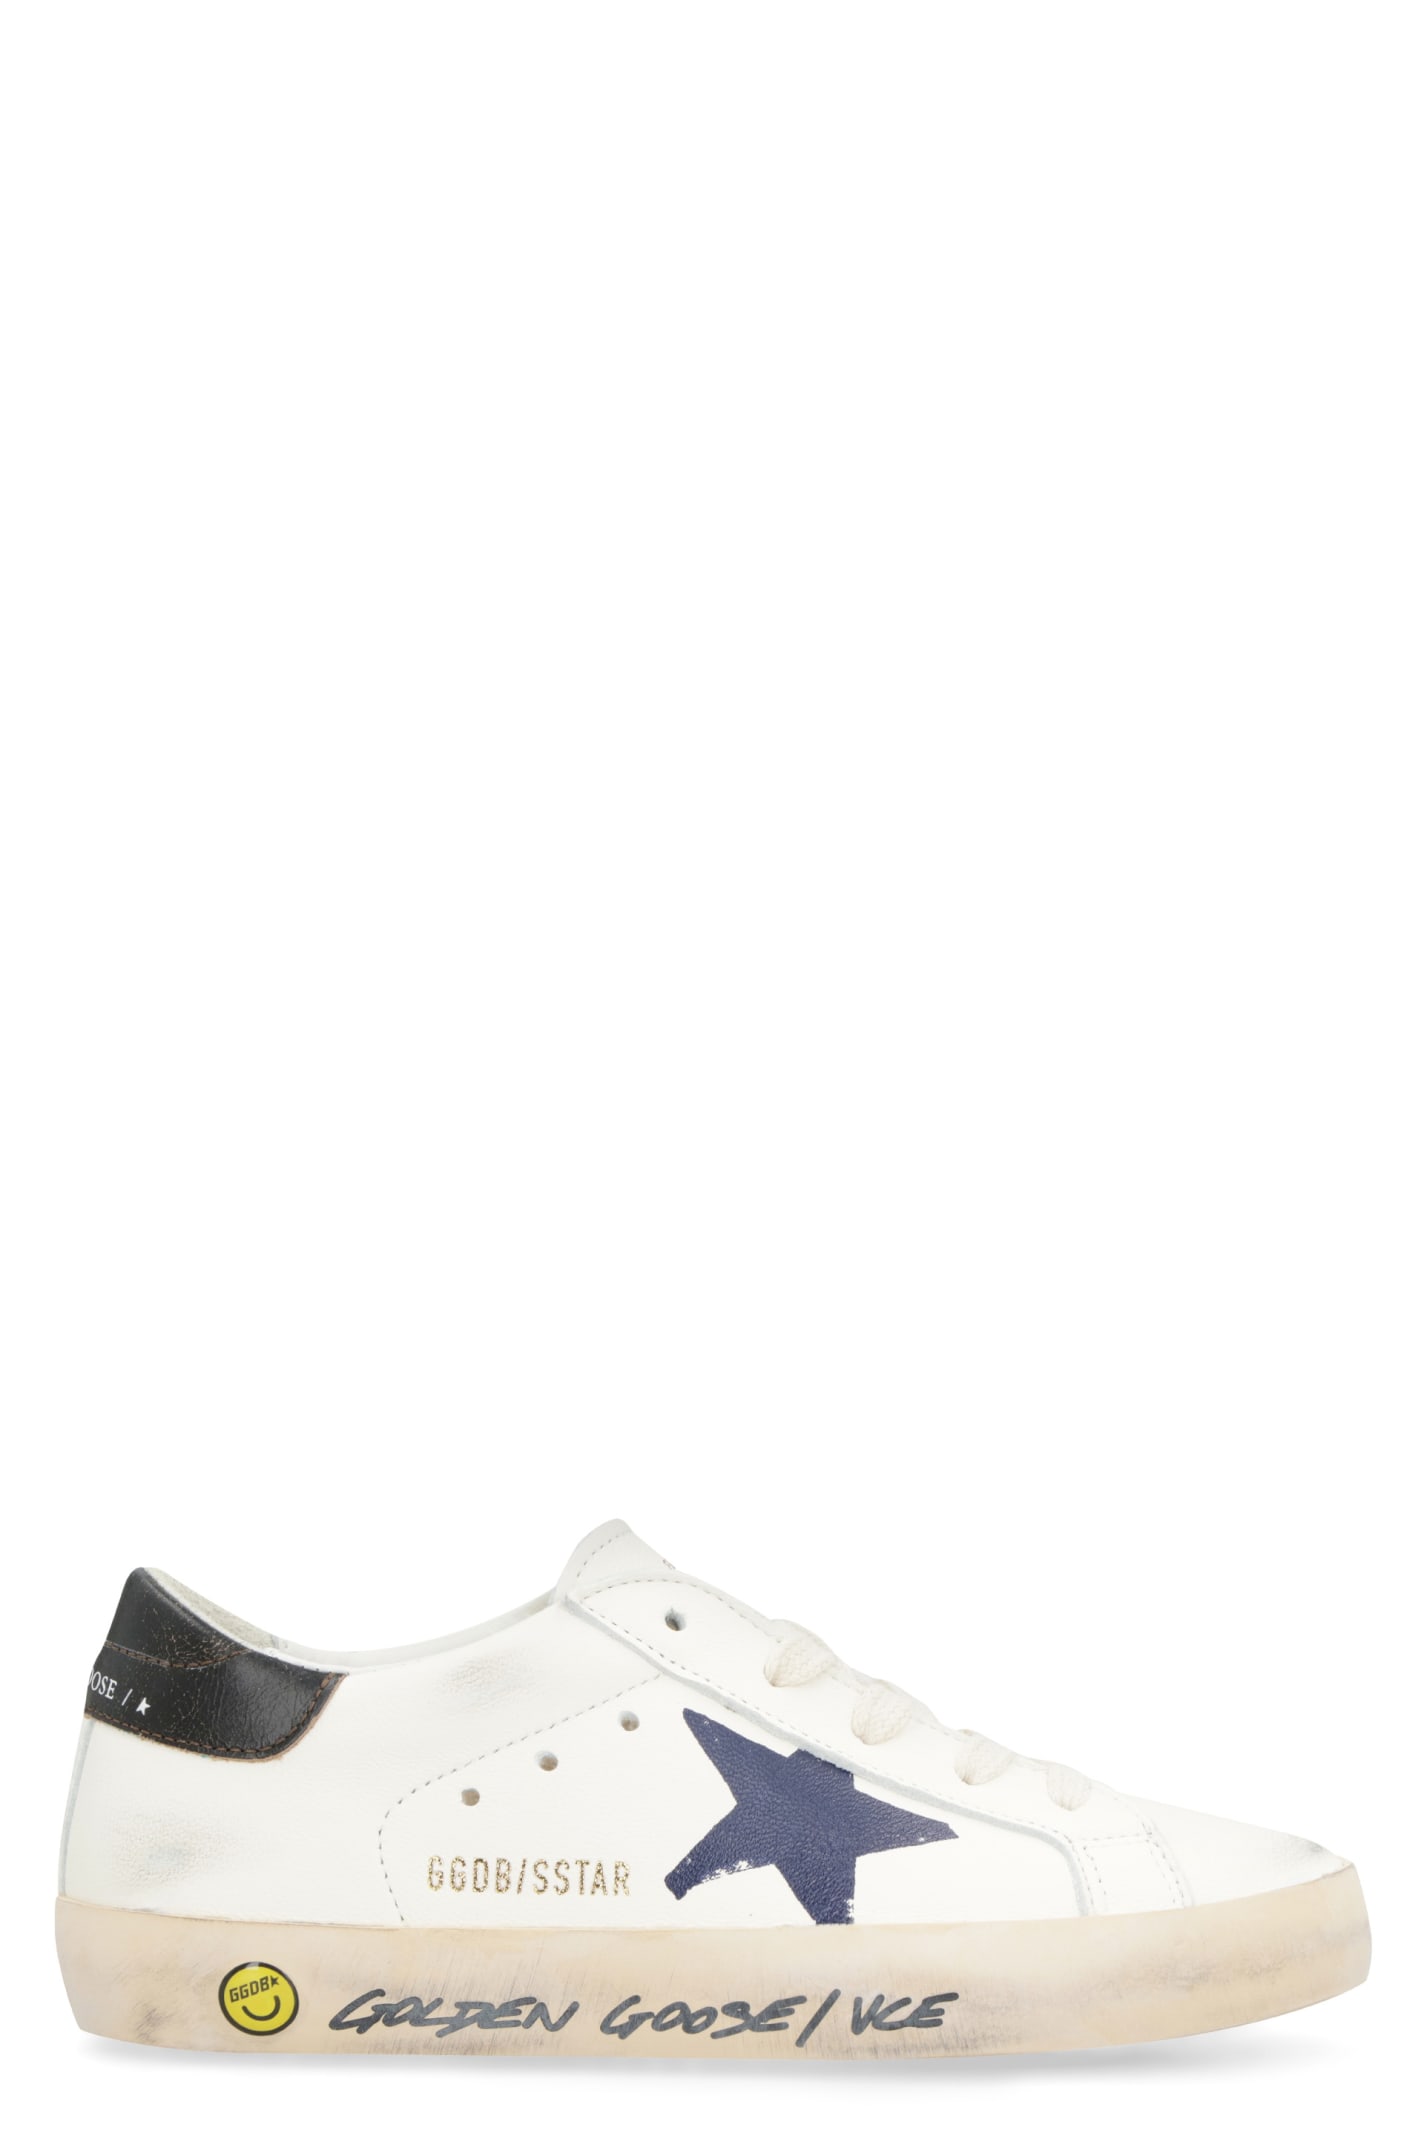 Golden Goose Super-star Leather Low-top Sneakers